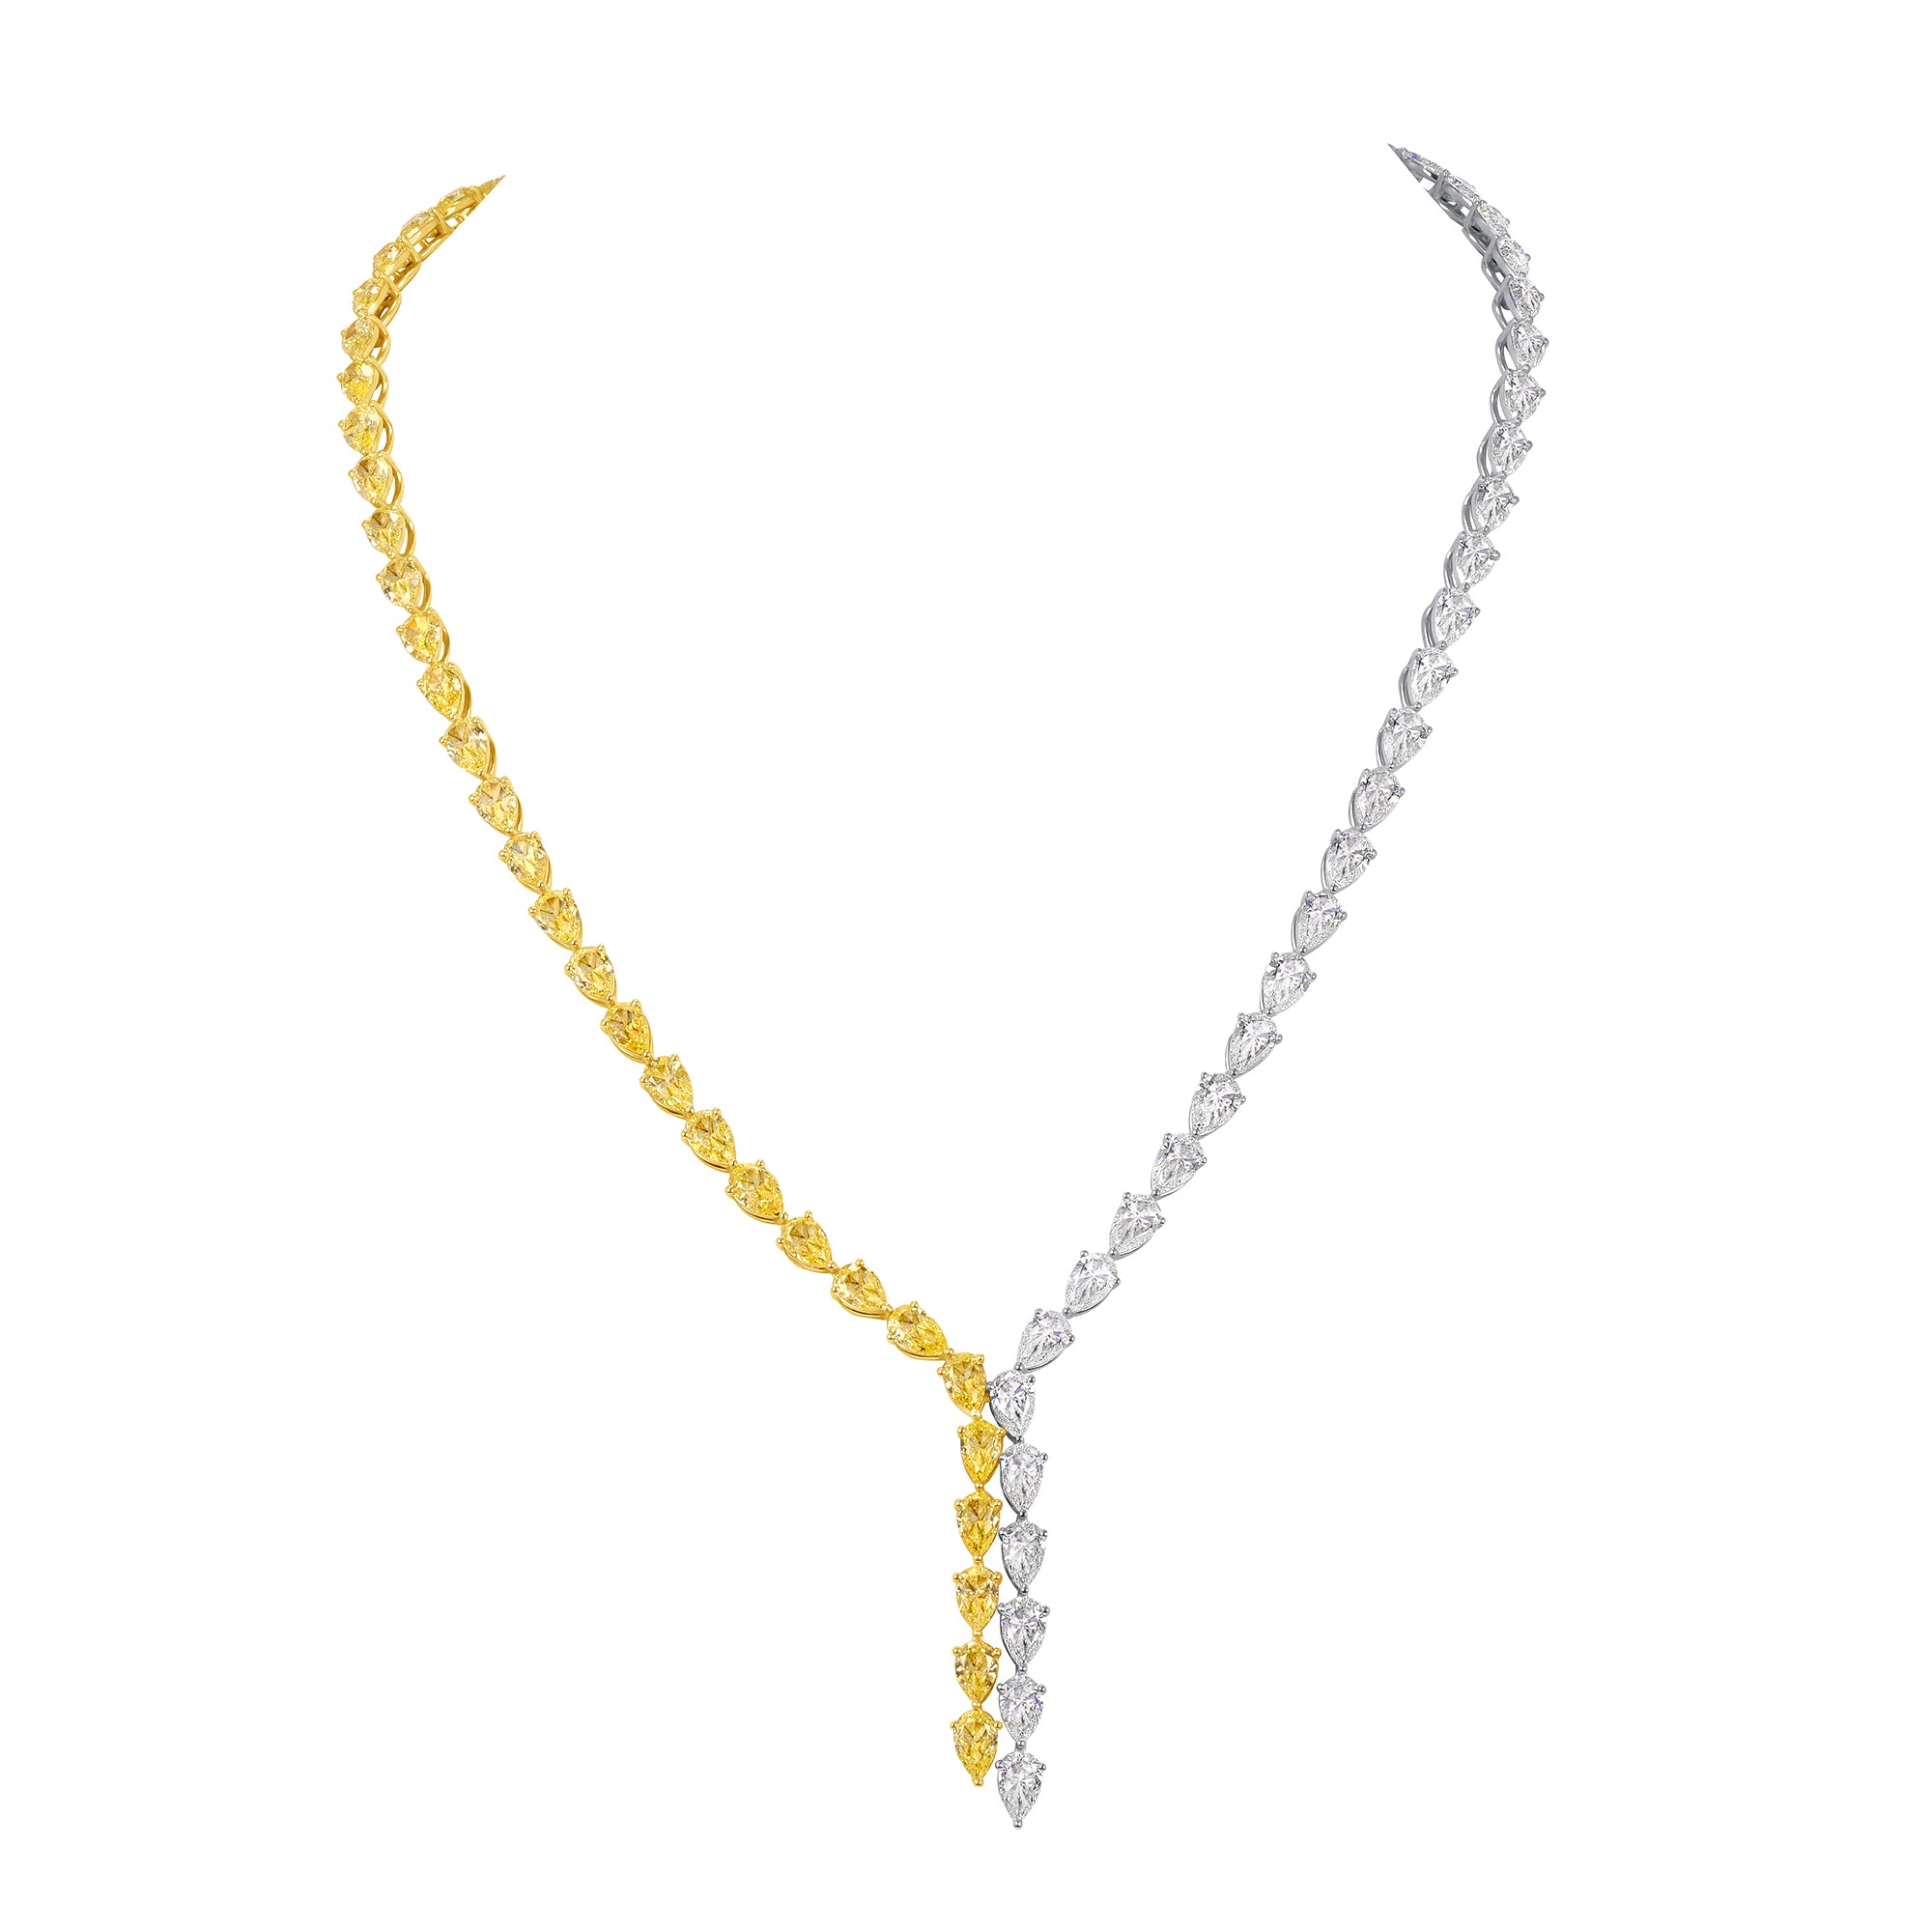 Pear Shape White and Yellow Diamond Lariat Necklace in 18 Karat White Gold and Yellow Gold